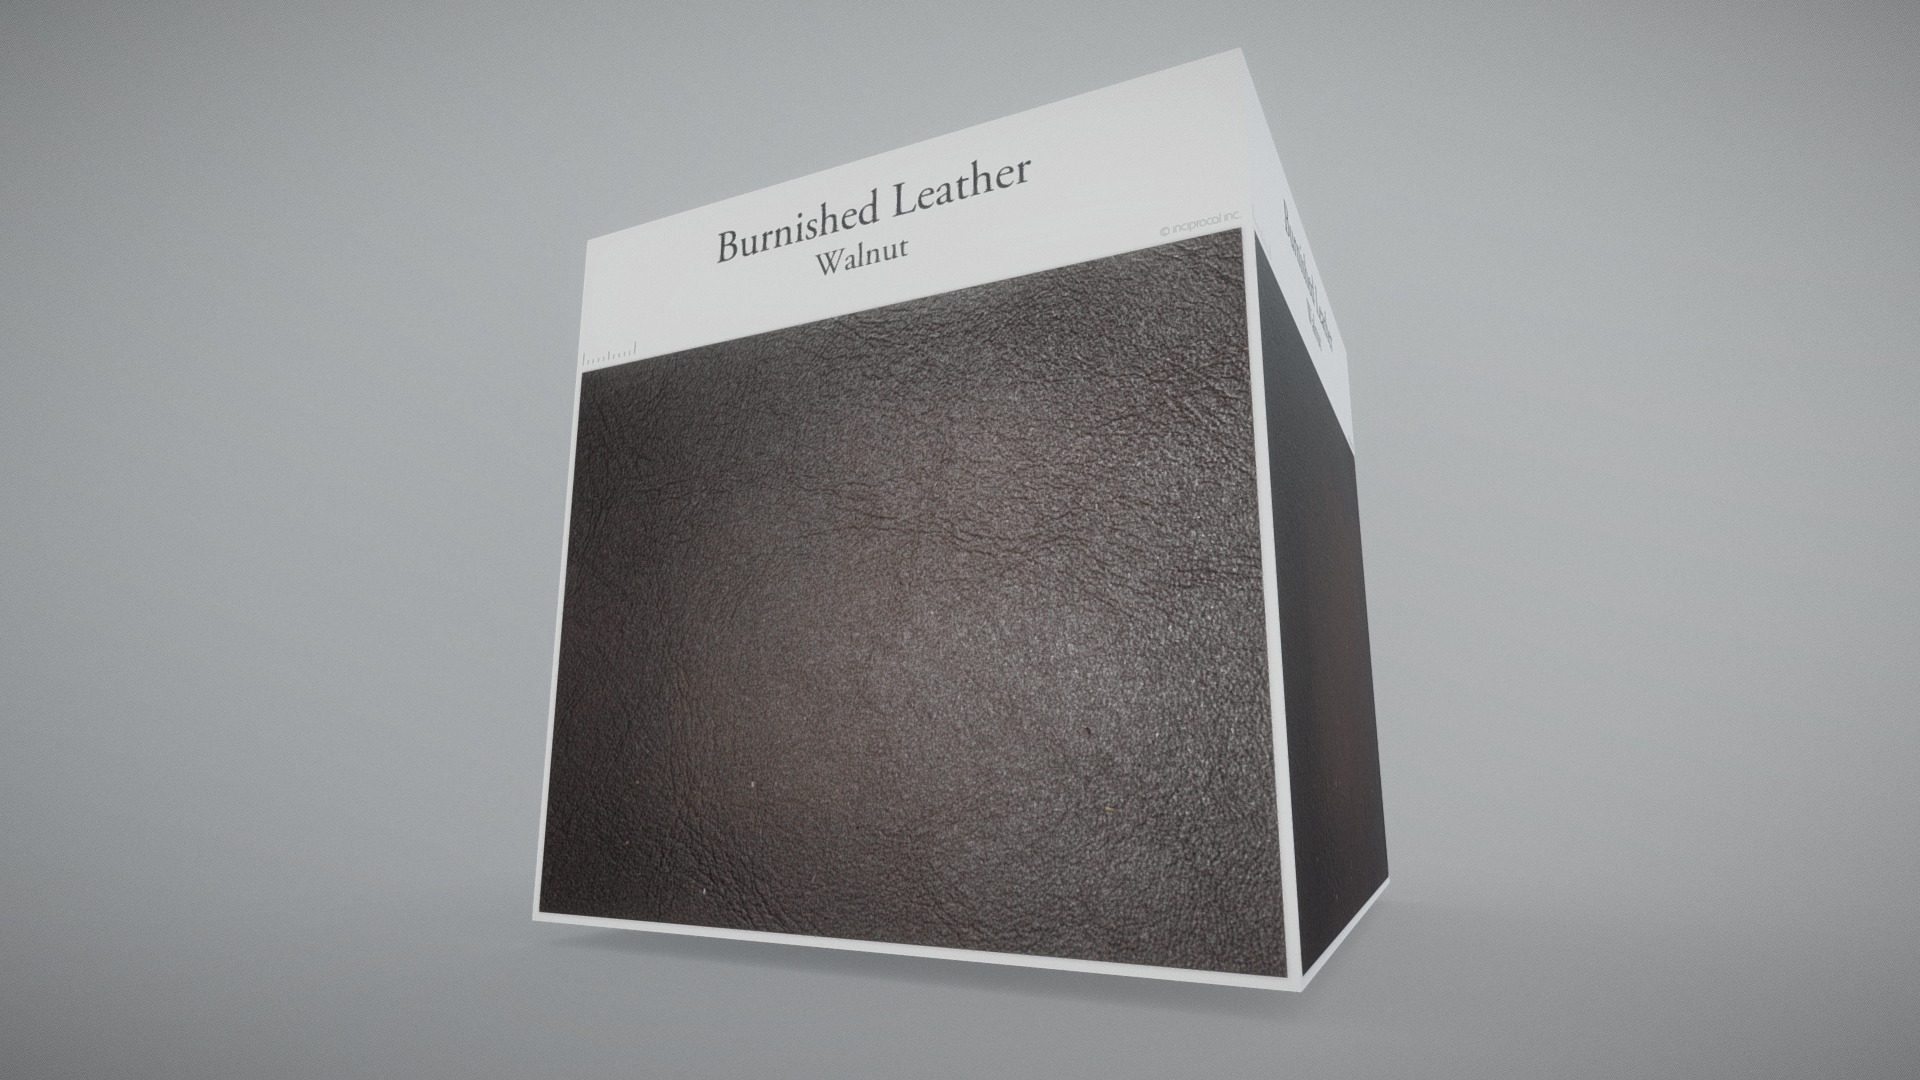 3D model Burnished Leather (Walnut) - This is a 3D model of the Burnished Leather (Walnut). The 3D model is about a white box with black text.